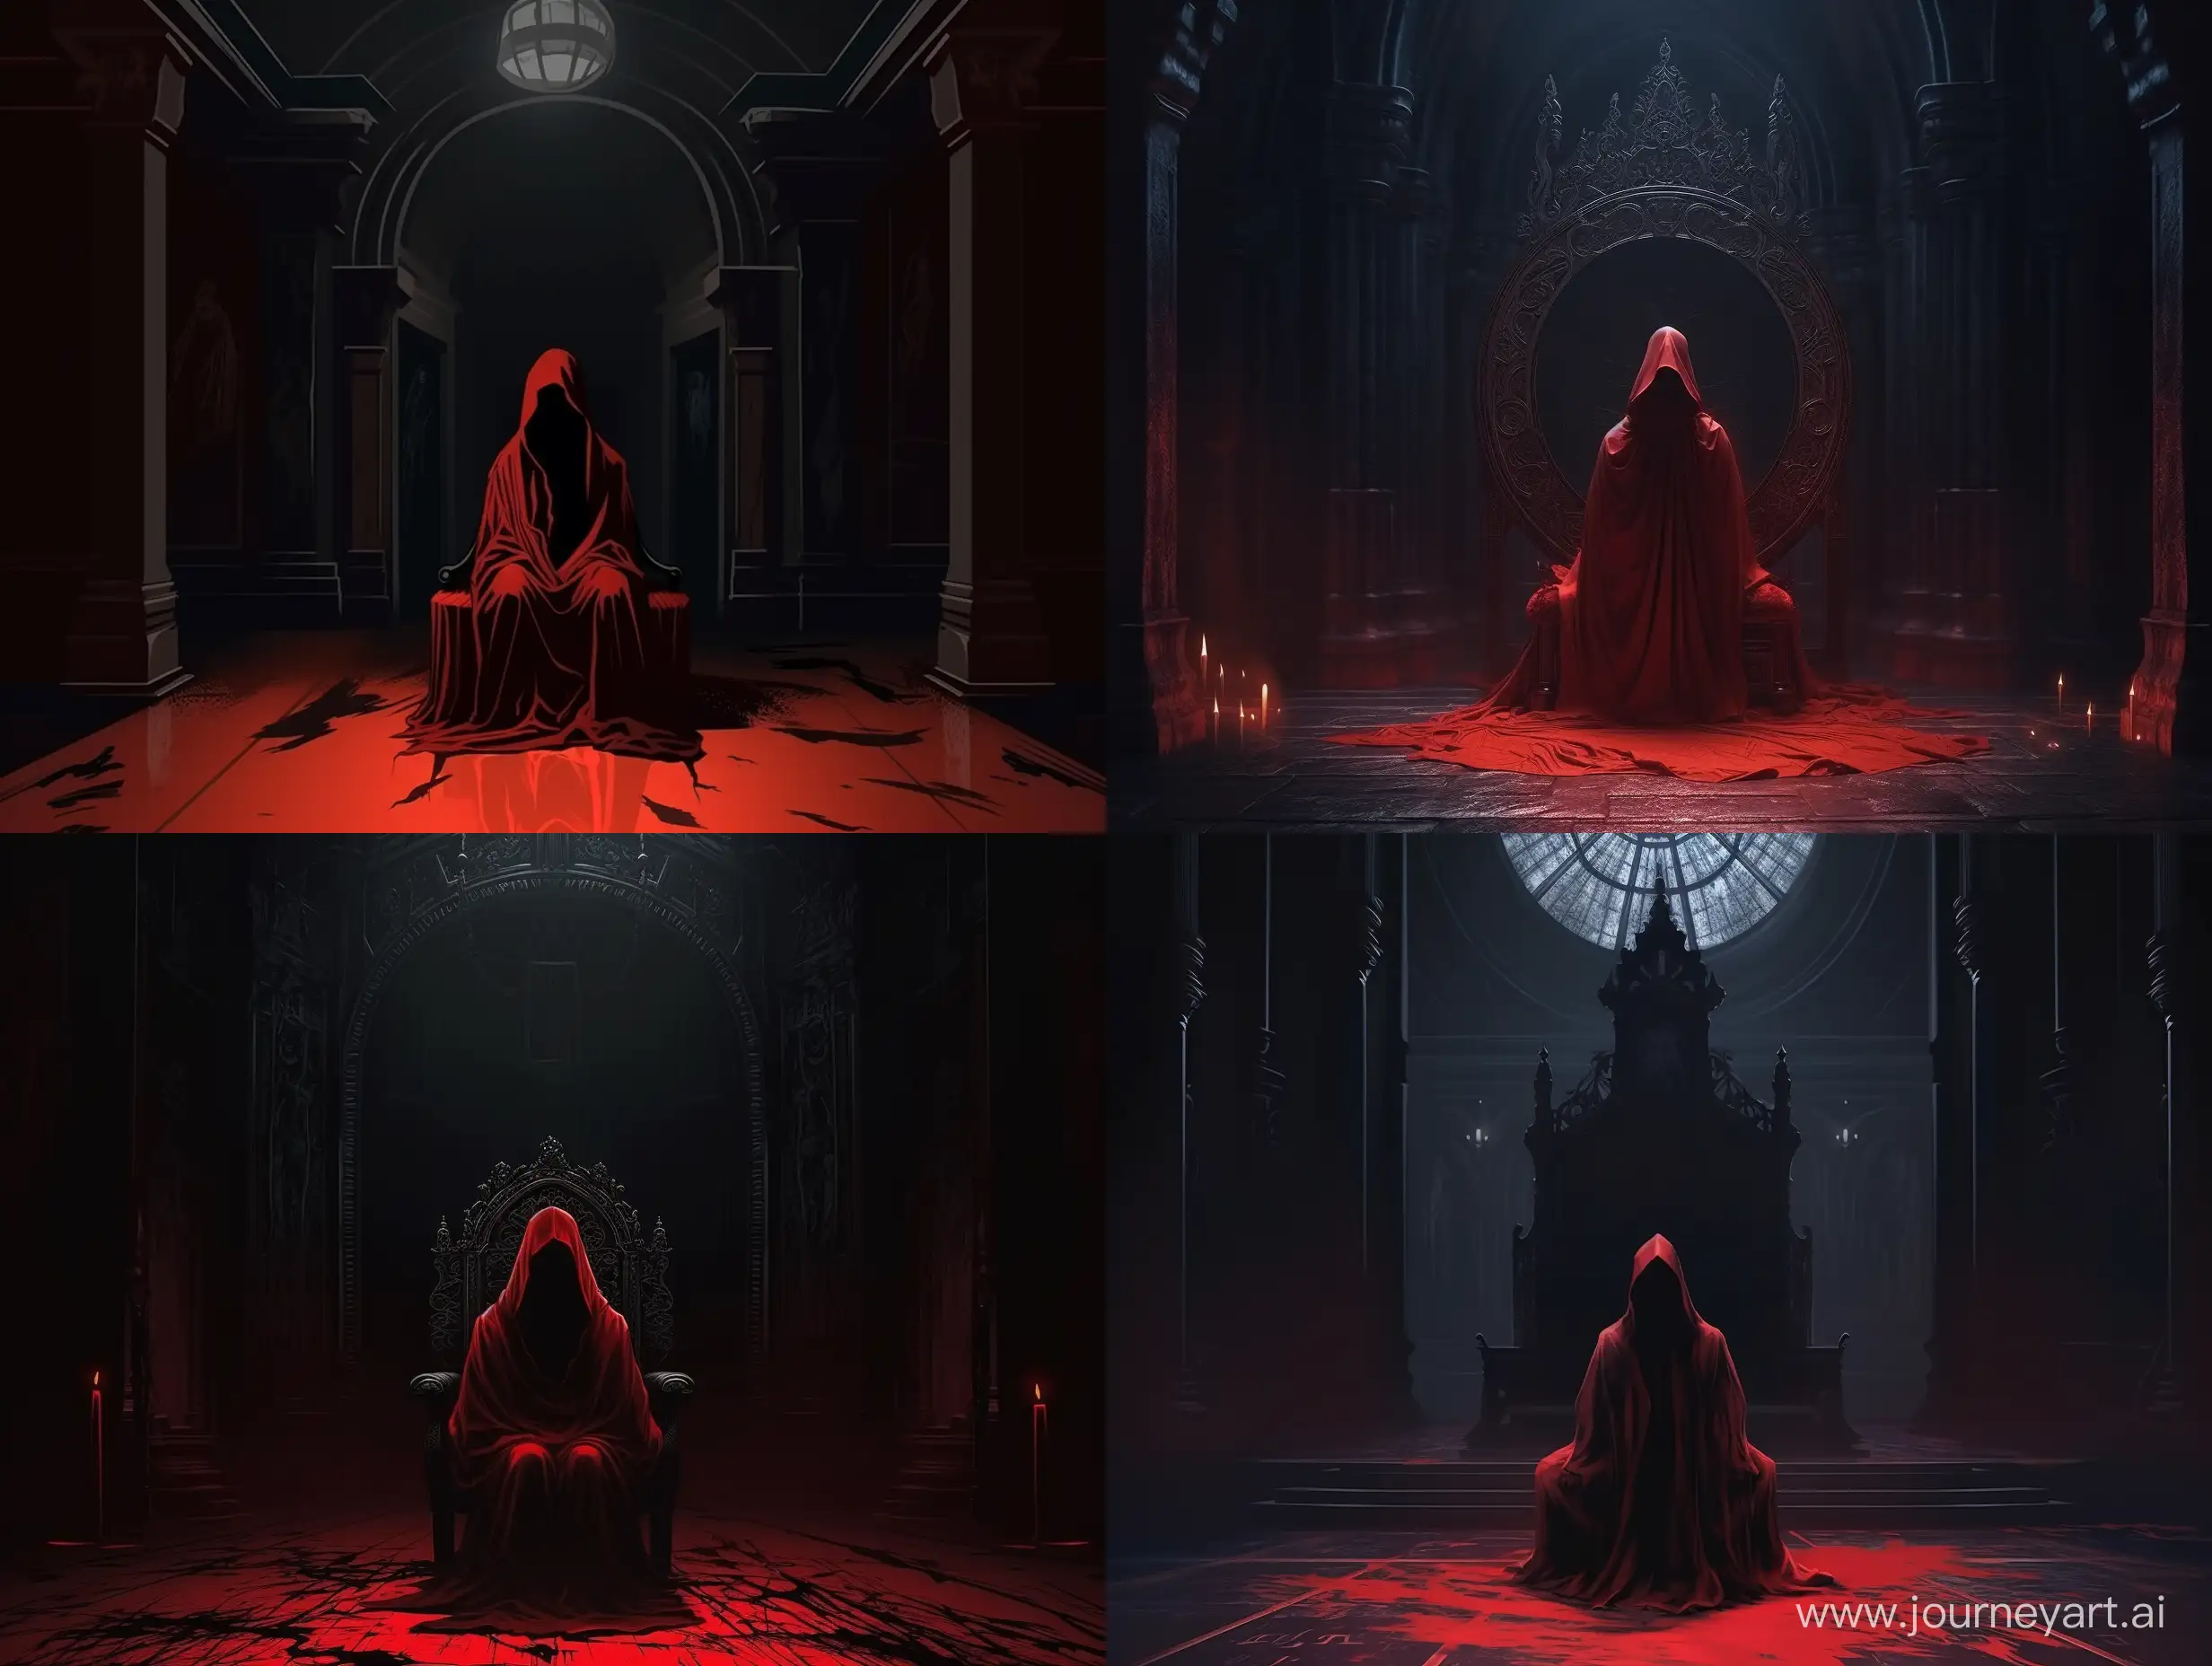 Mysterious-Figure-in-Red-Cloak-on-Throne-in-Enigmatic-Hall